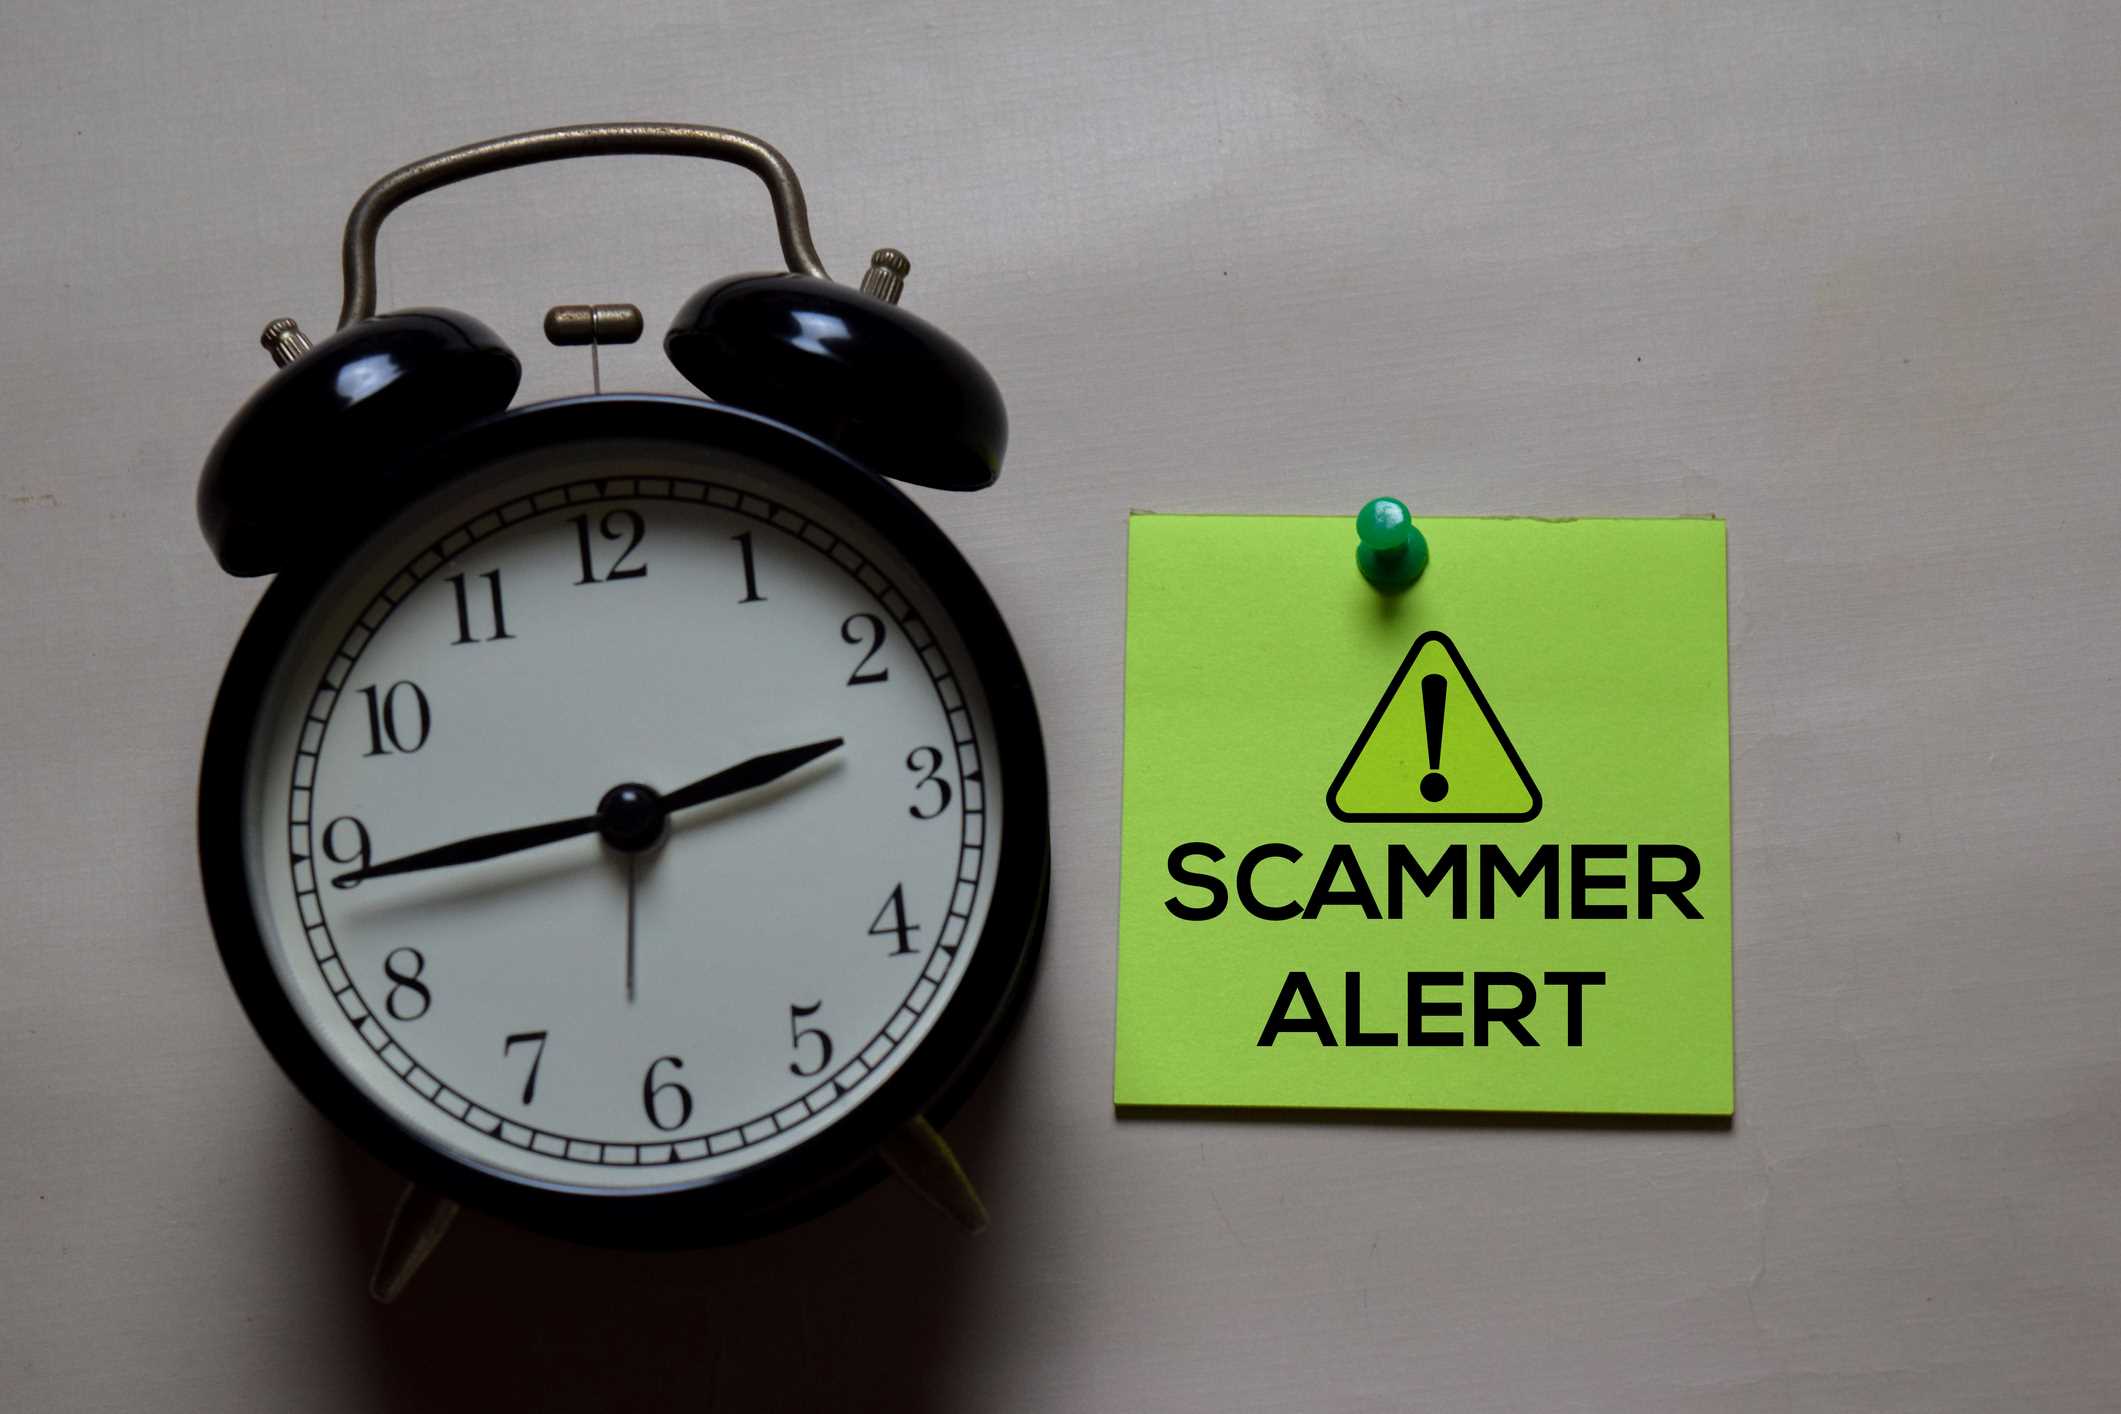 Scammer alert note tacked on wall next to a black alarm clock.